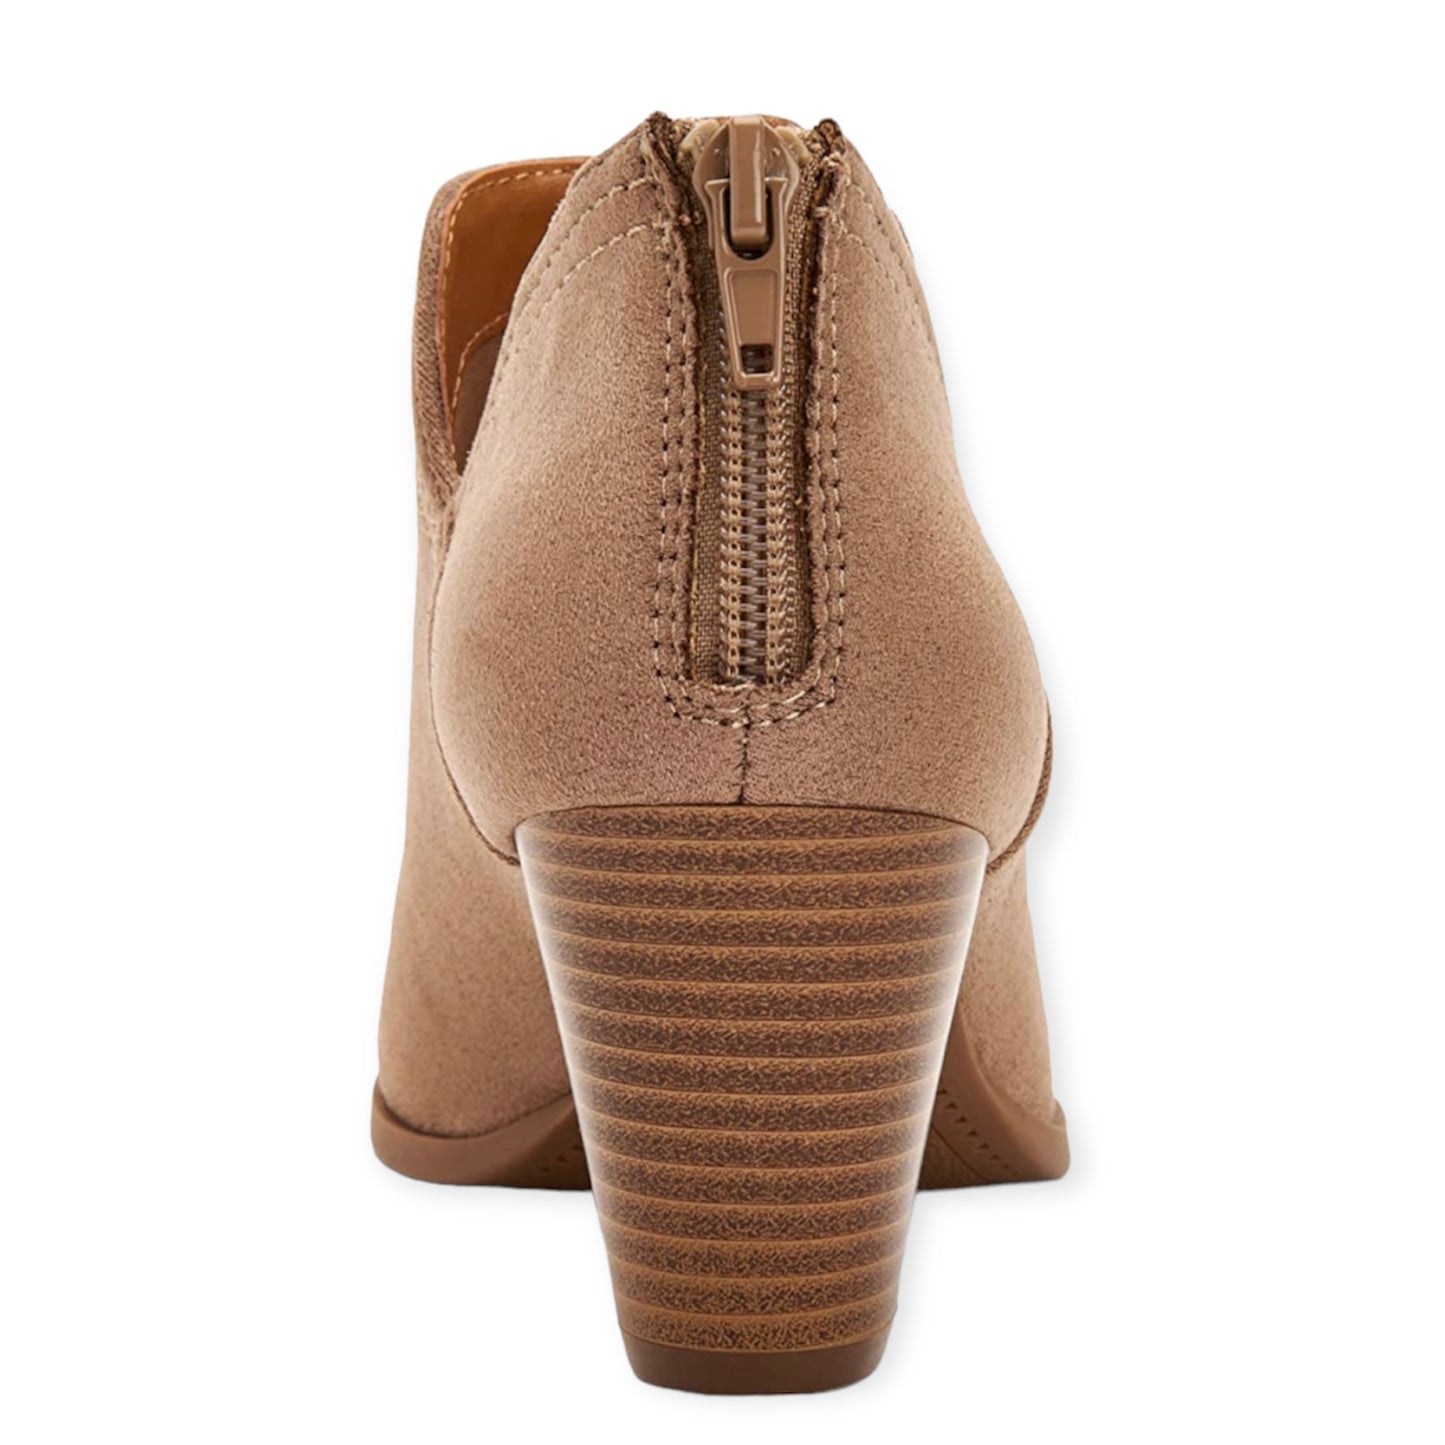 AMANDDEF Taupe Memory Form Almond Toe Bootie Women's Shoes